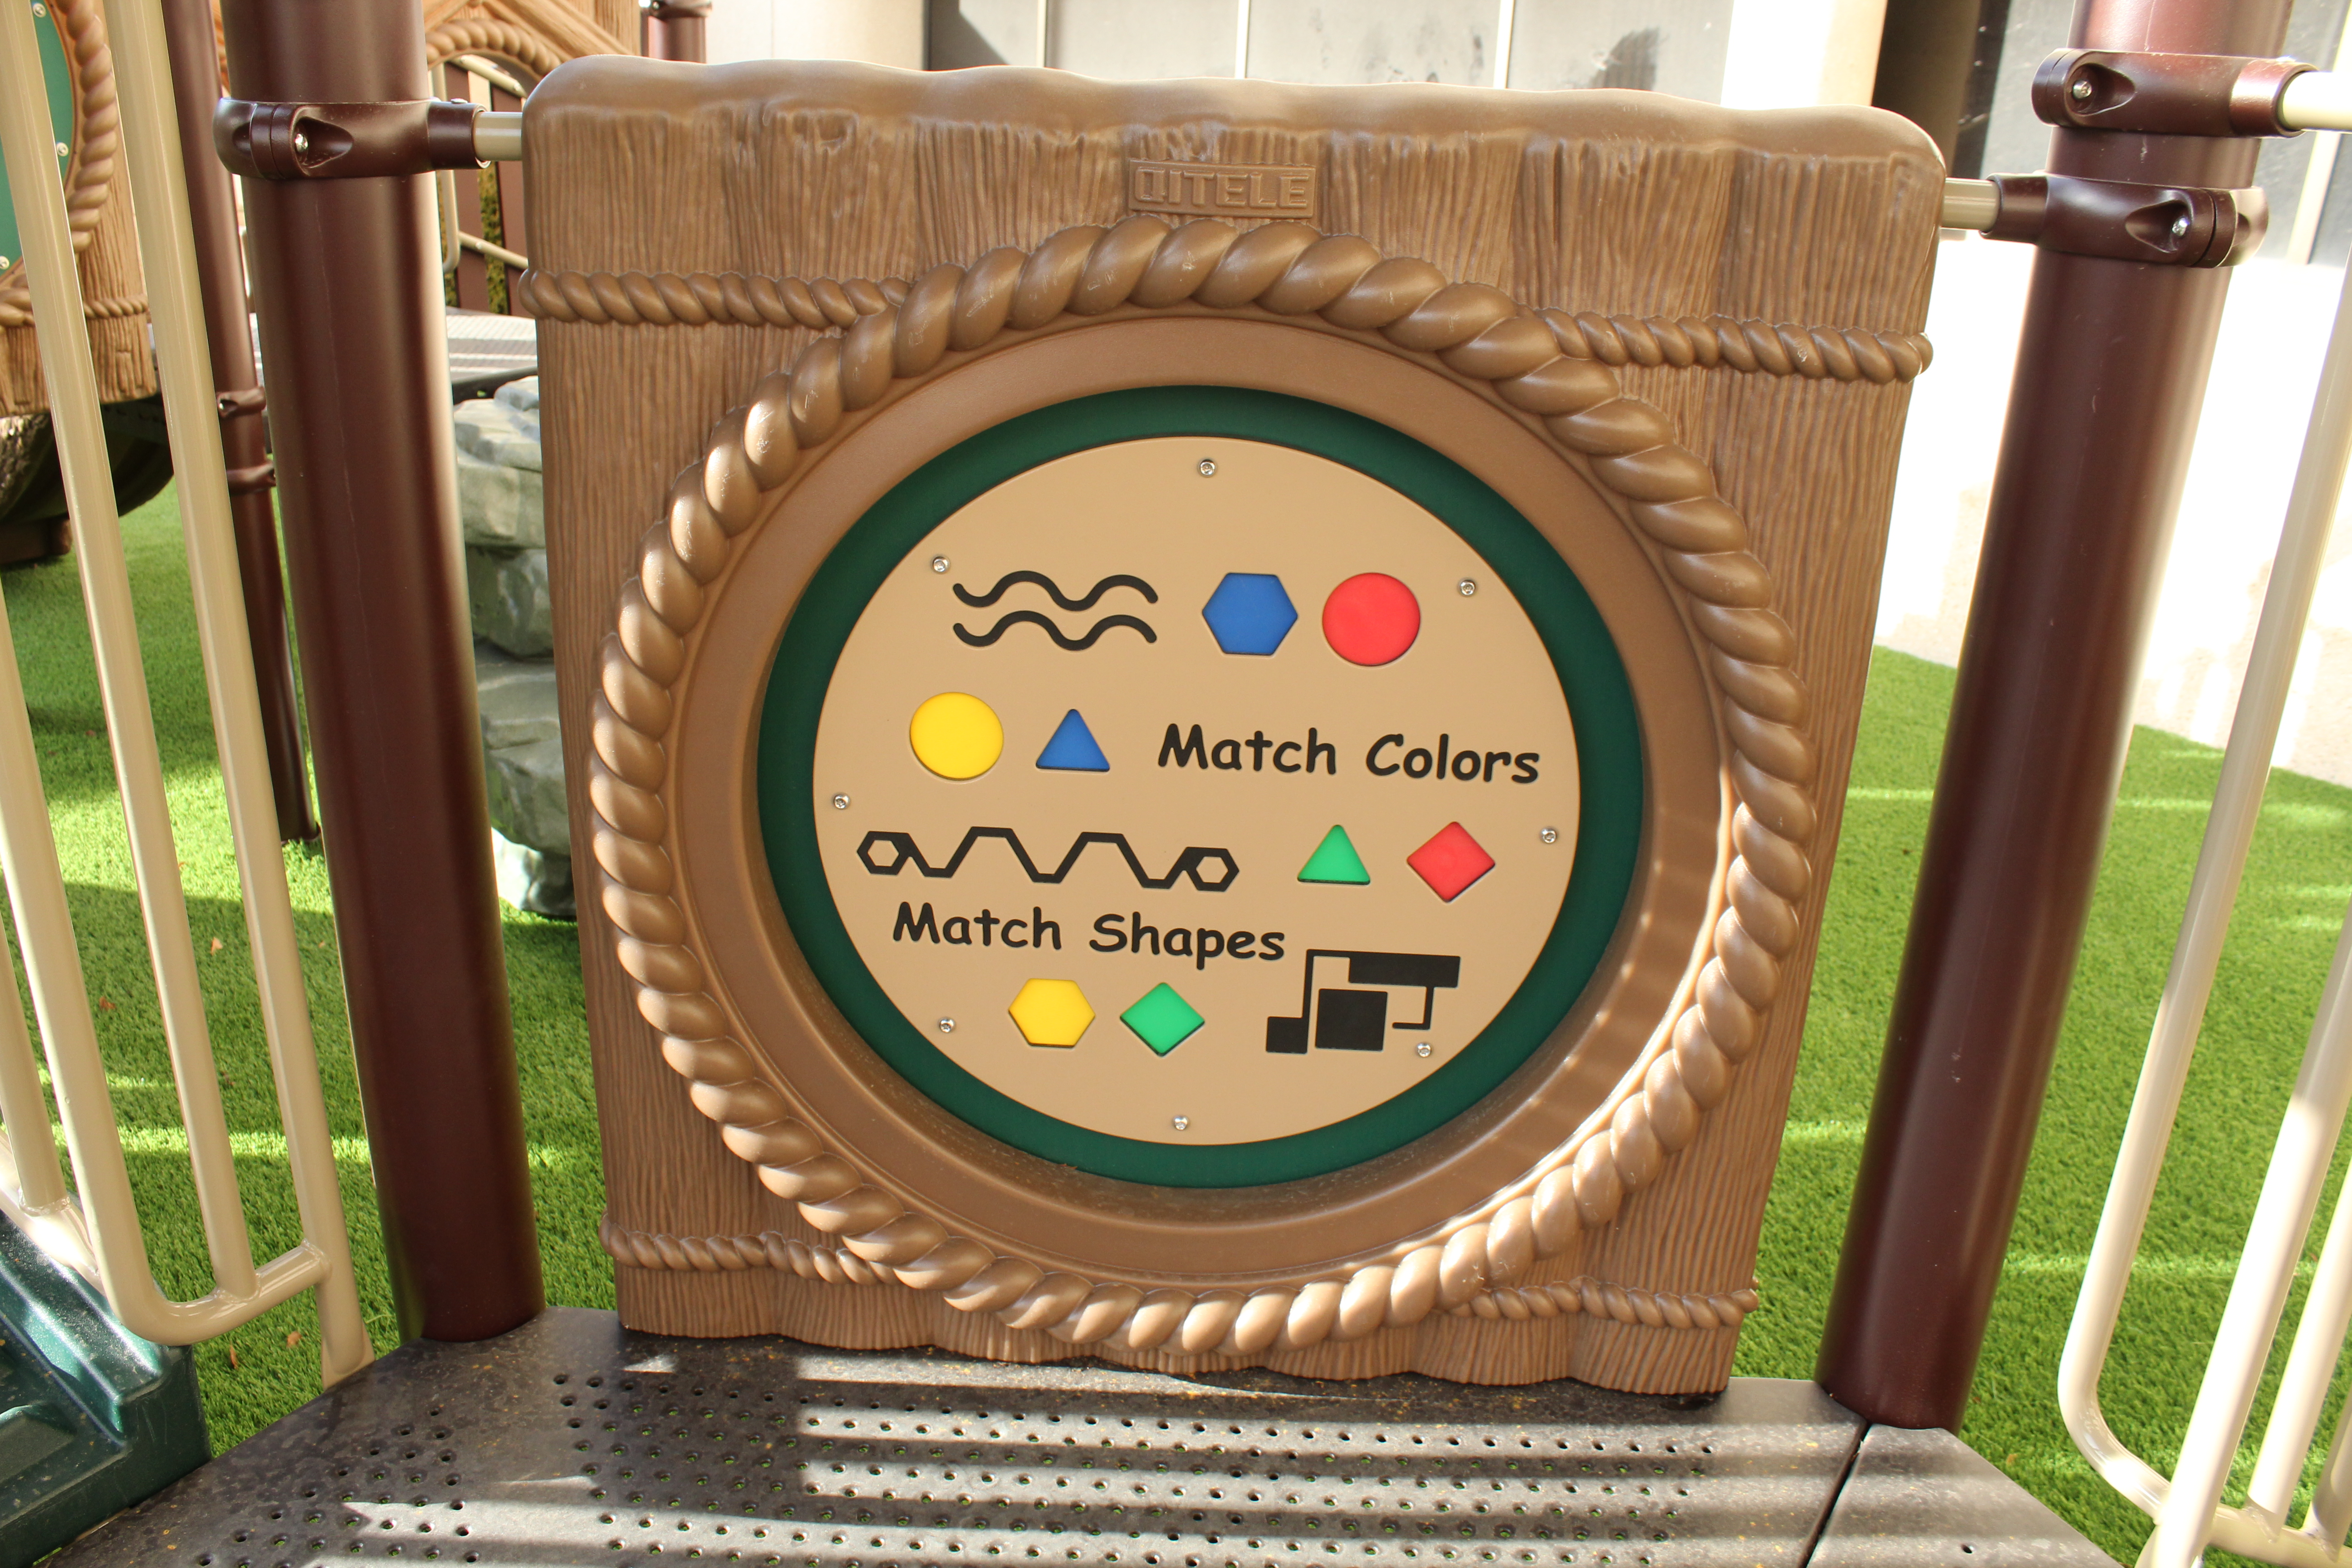 A close shot of an interactive toy on the new playground allowing children to match colors.